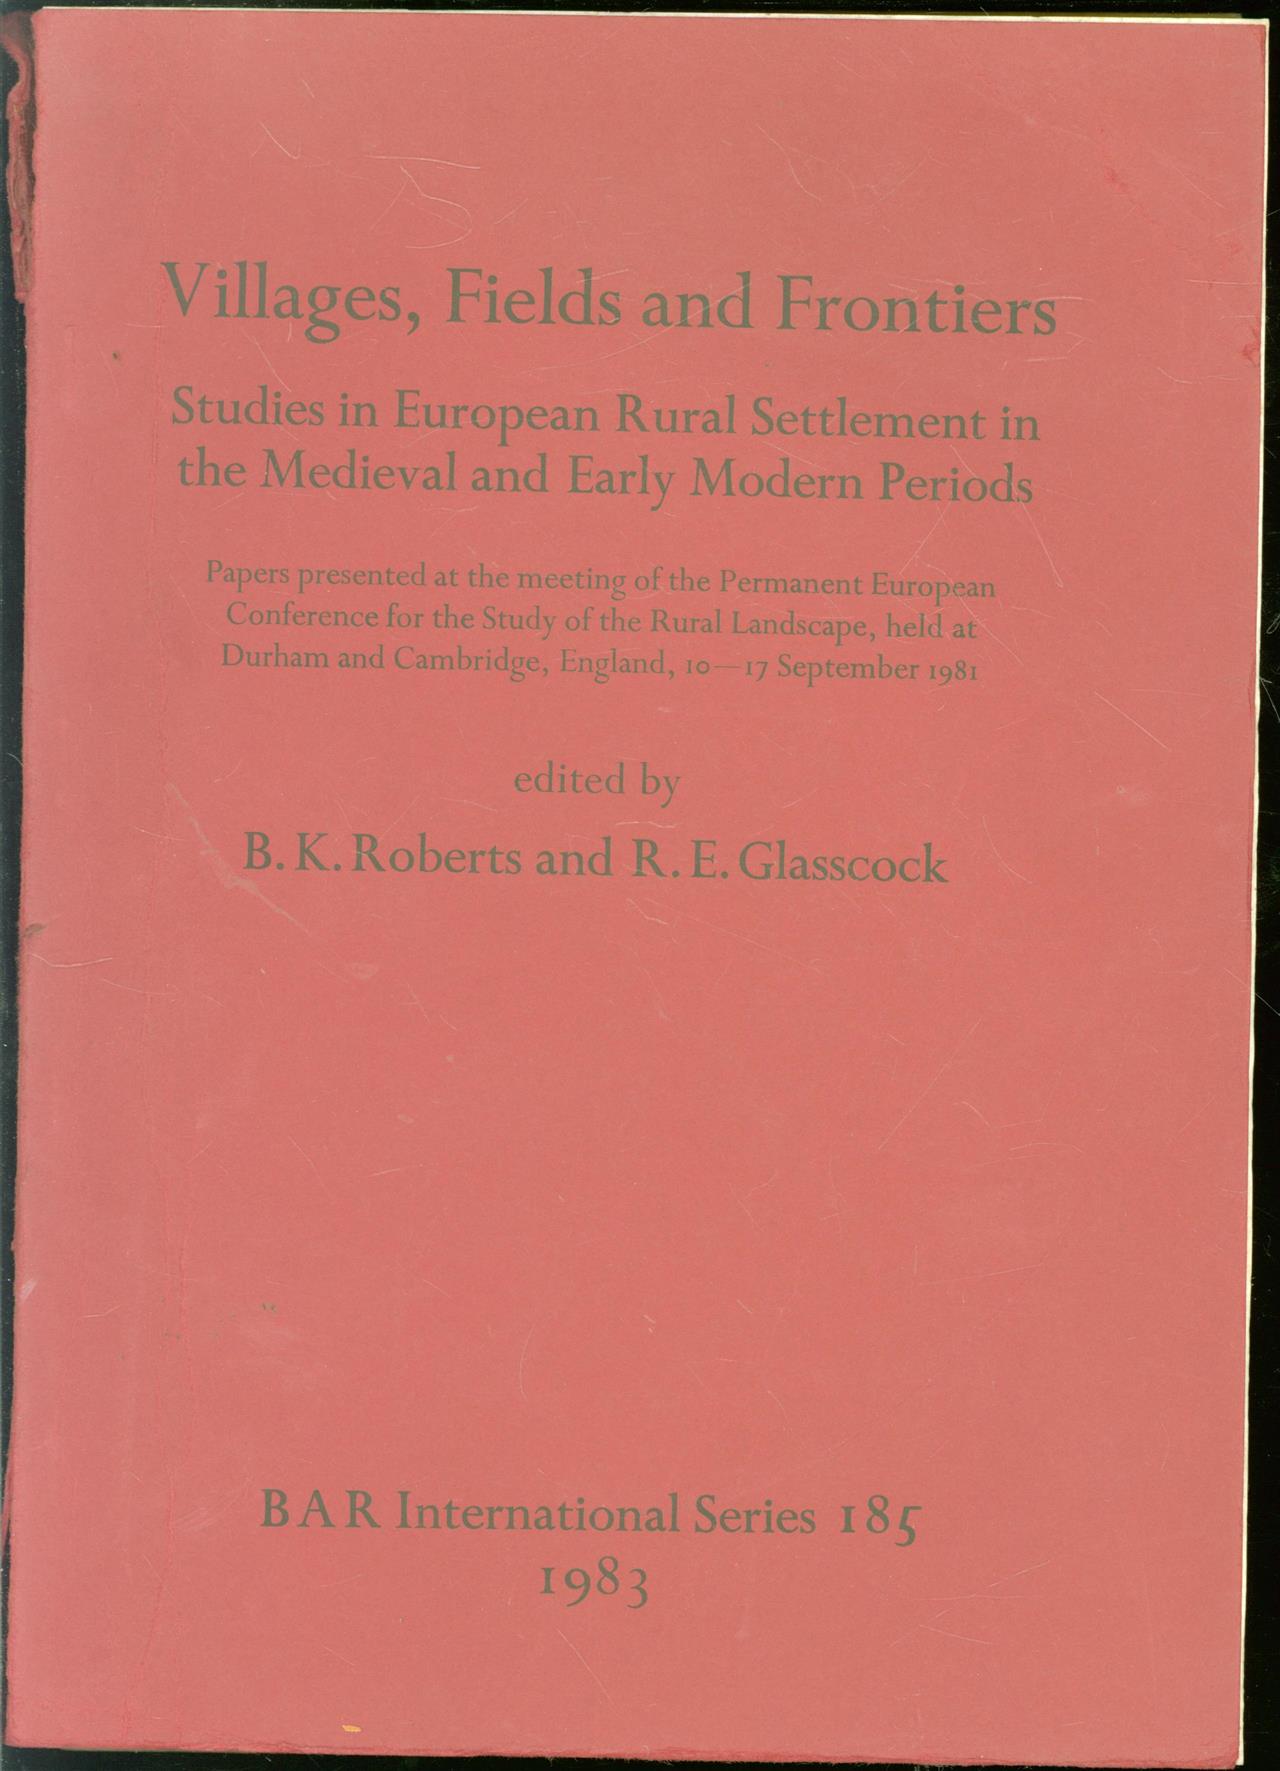 Brian K. Roberts, R. E. Glasscock, Permanent European Conference for the study of the rural landscape Permanent European Conference for the study of the rural landscape (10/17-09-1981: Durham, Cambridge) - Villages, fields and frontiers: studies in European rural settlement in the Medieval and Early Modern Periods